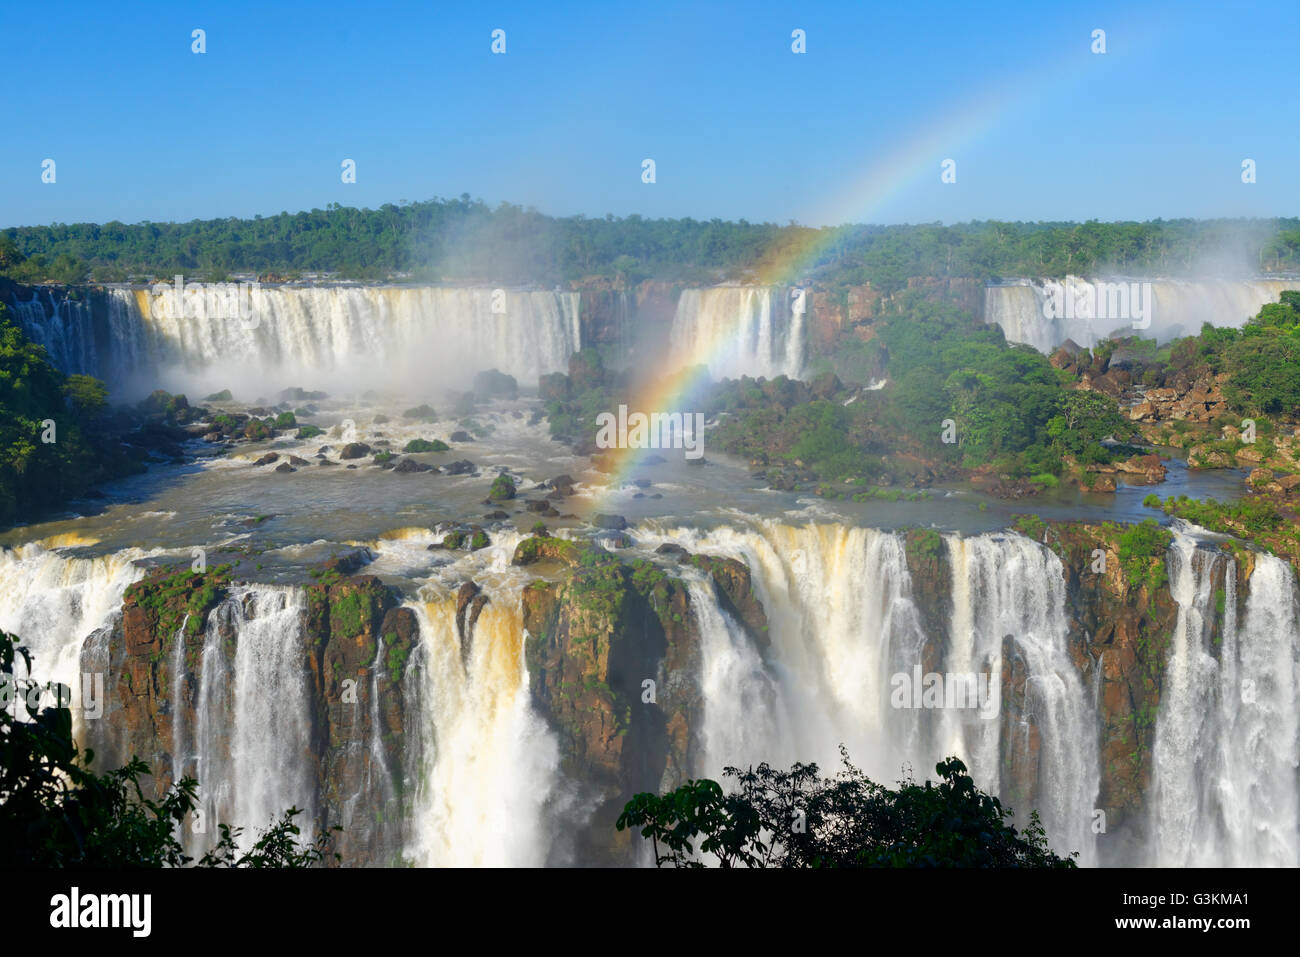 Rainbow arching over Iguacu Falls, between Brazil and Argentina waterfall Stock Photo